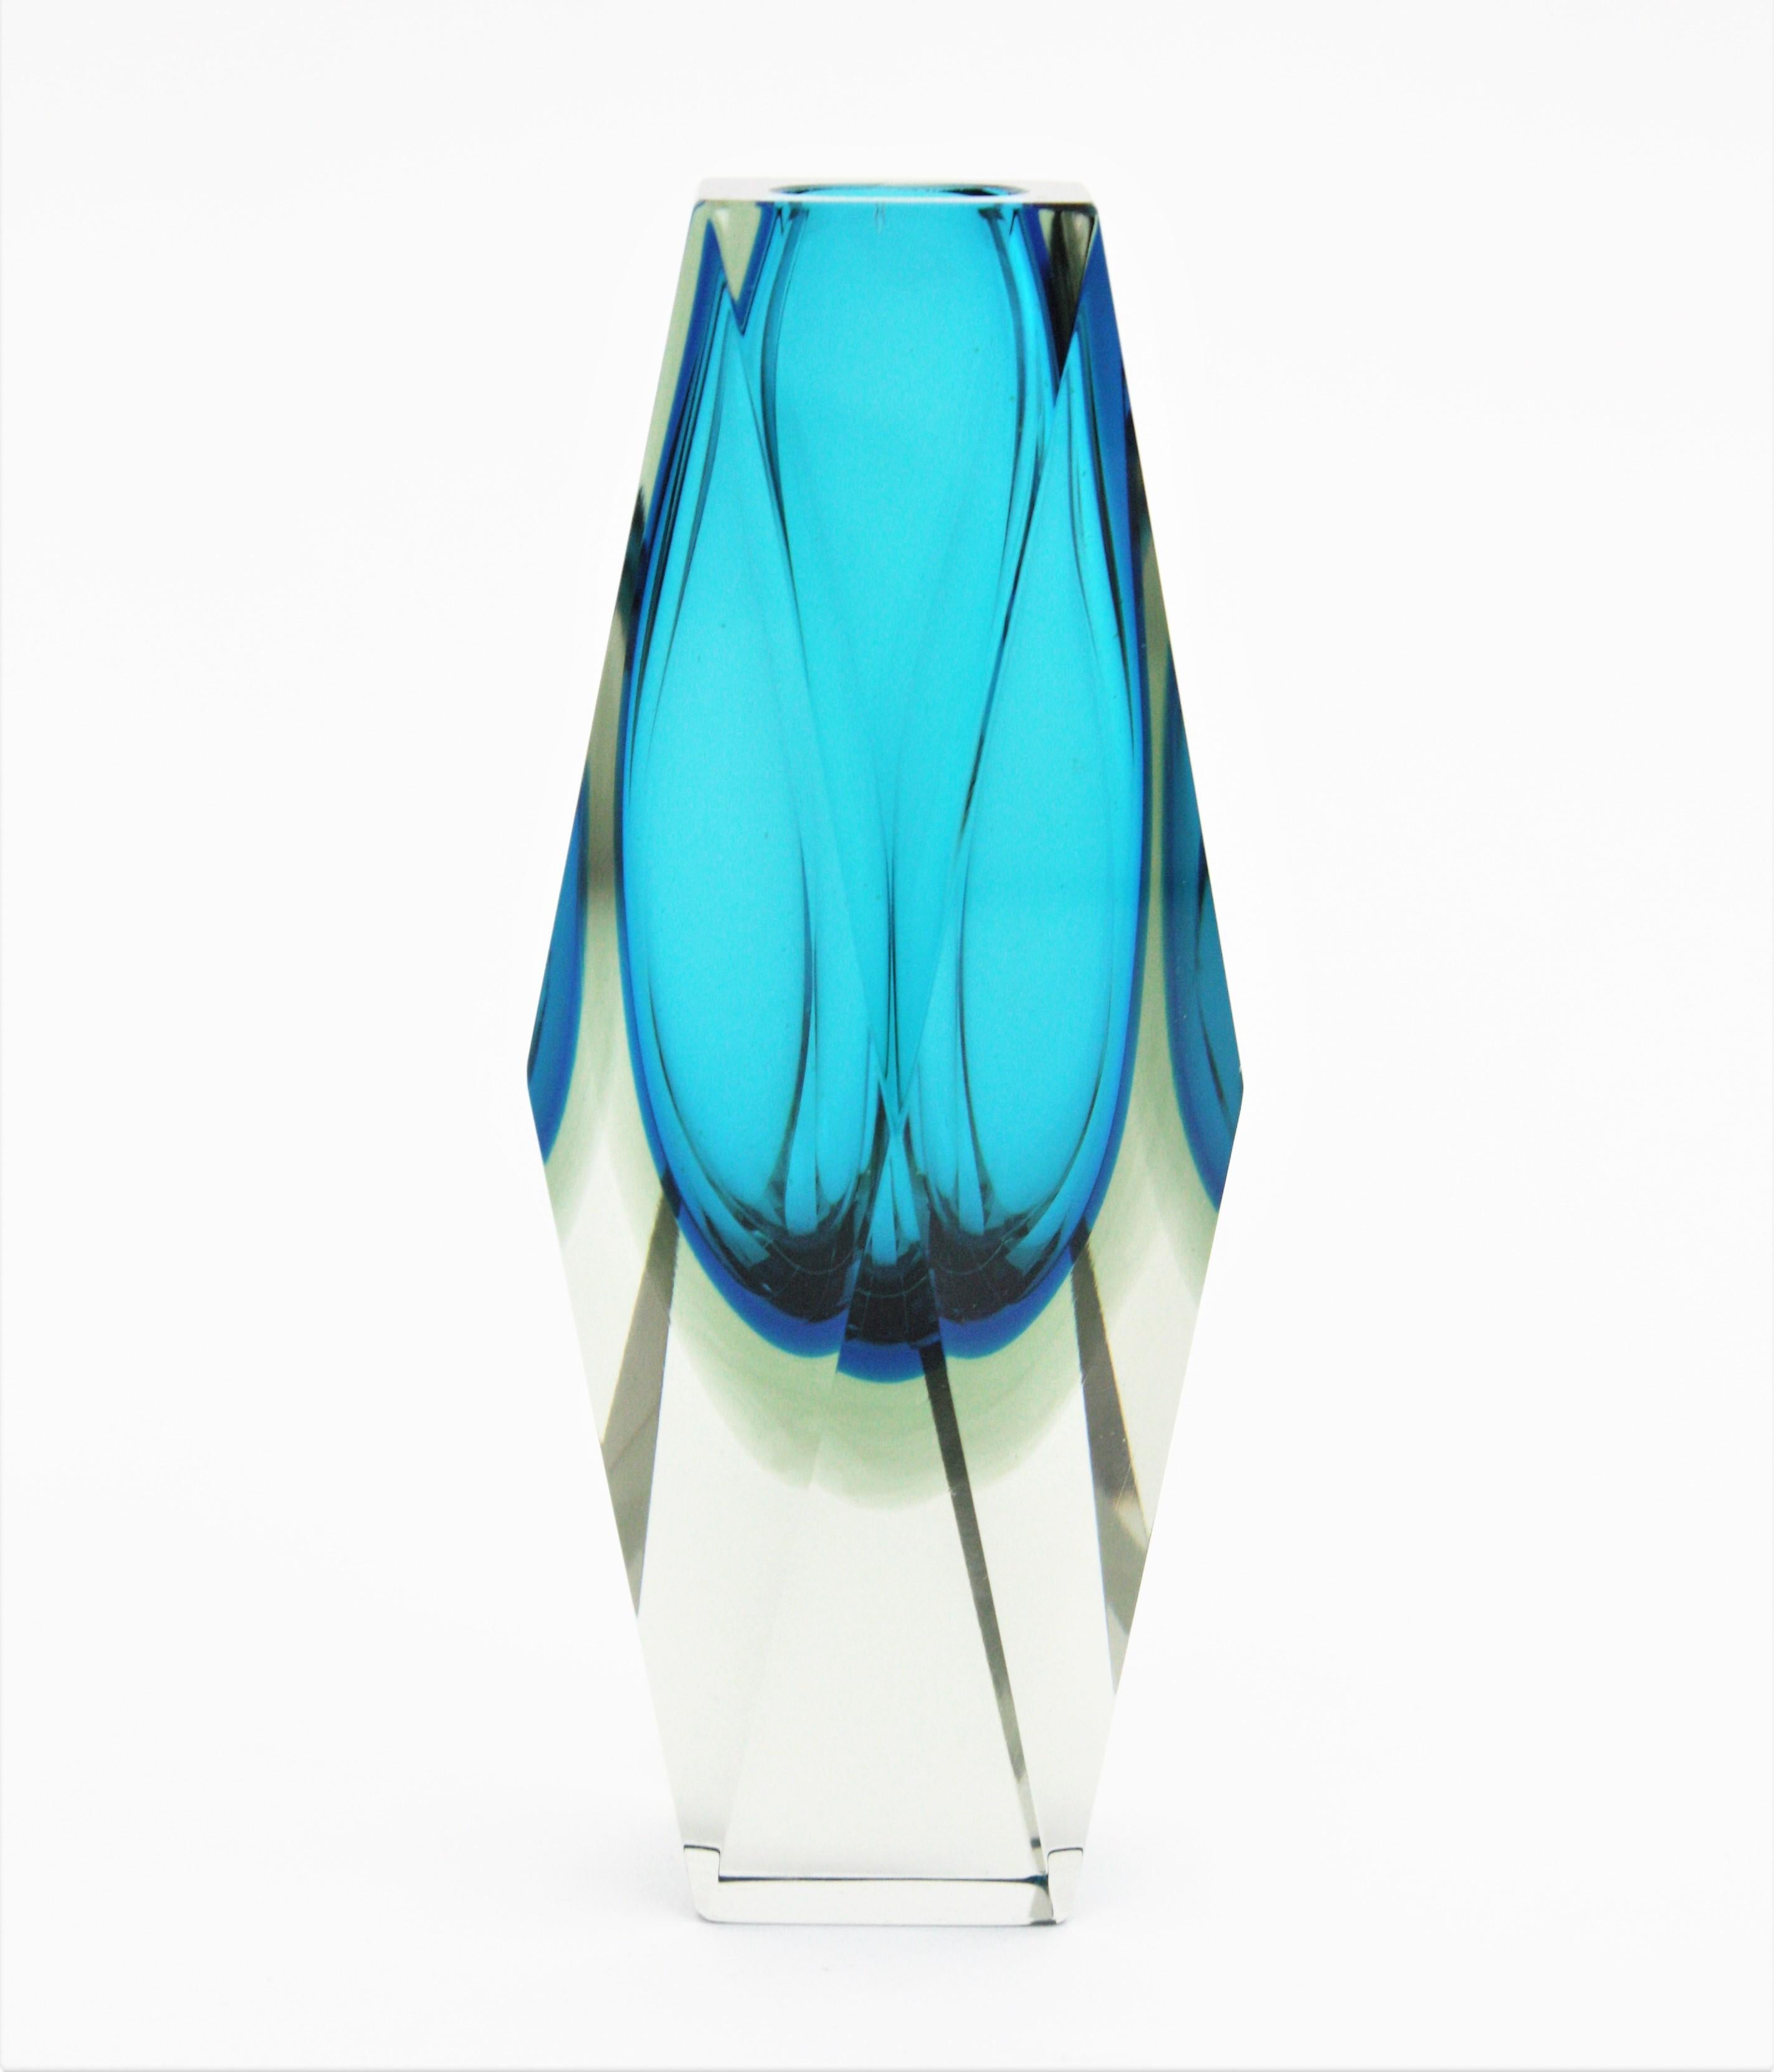 Eye-catching faceted Murano glass Sommerso vase in blue color attributed to Mandruzzato. Italy, 1960s. 
Blue glass with a layer in darker blue cased into clear glass. 
Beautiful placed alone or as a part of a collection with other Murano glass